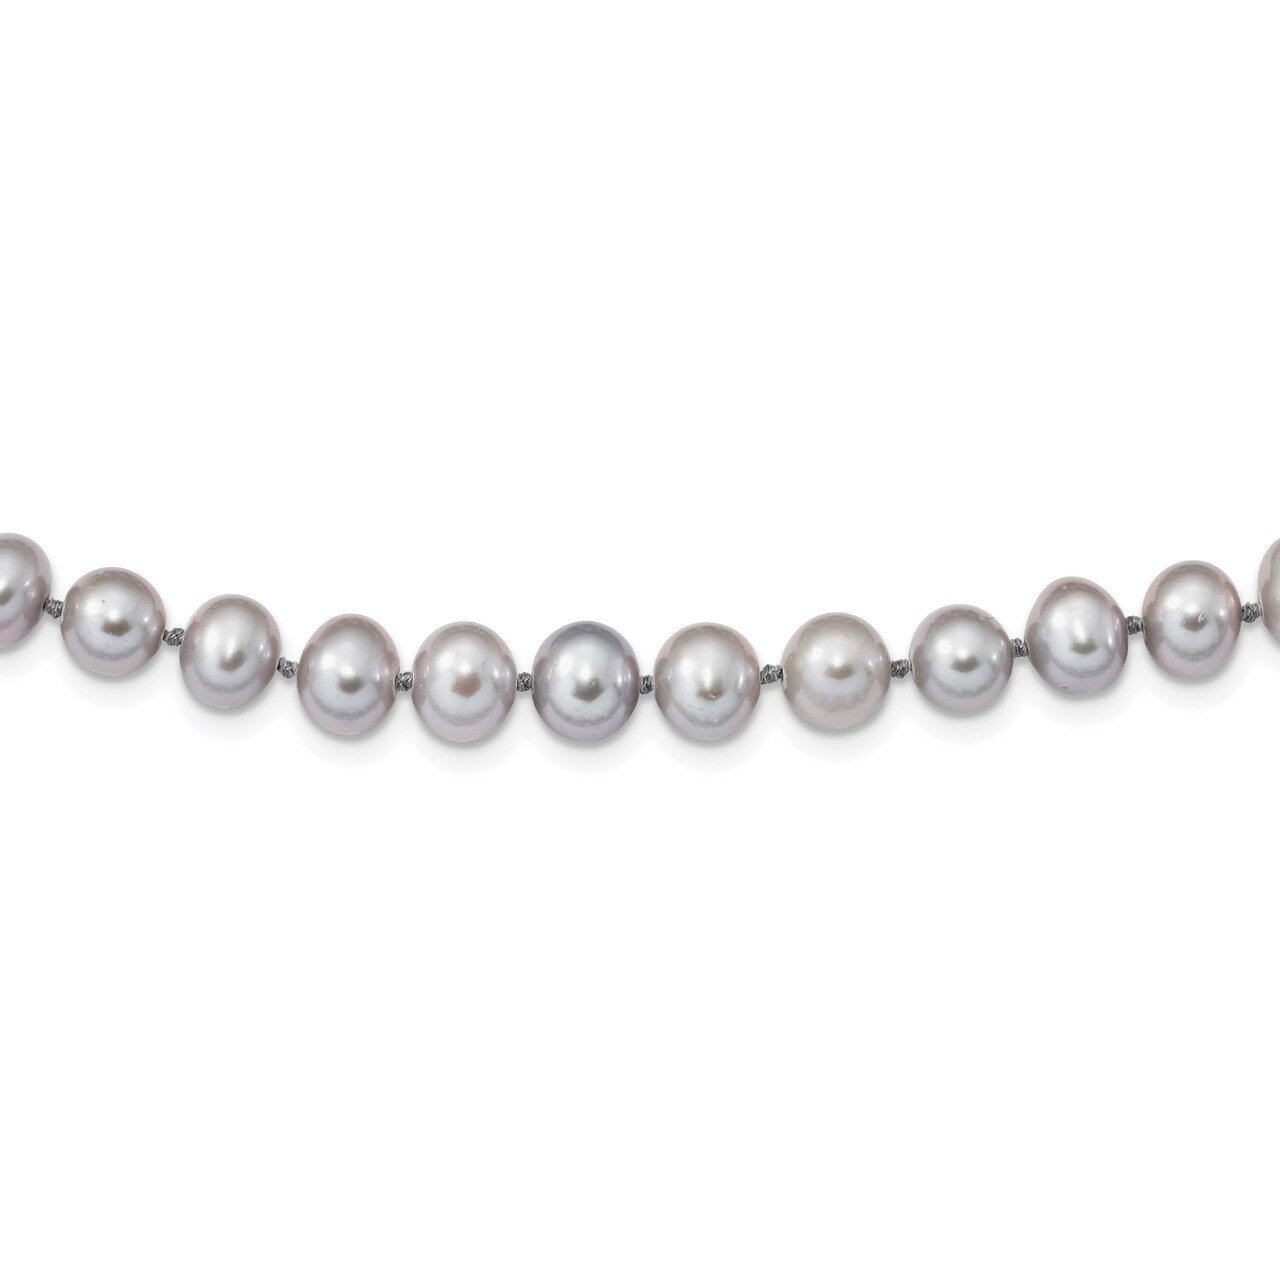 7-8mm Grey Cultured Freshwater Pearl Necklace 20 Inch Sterling Silver Rhodium QH5162-20